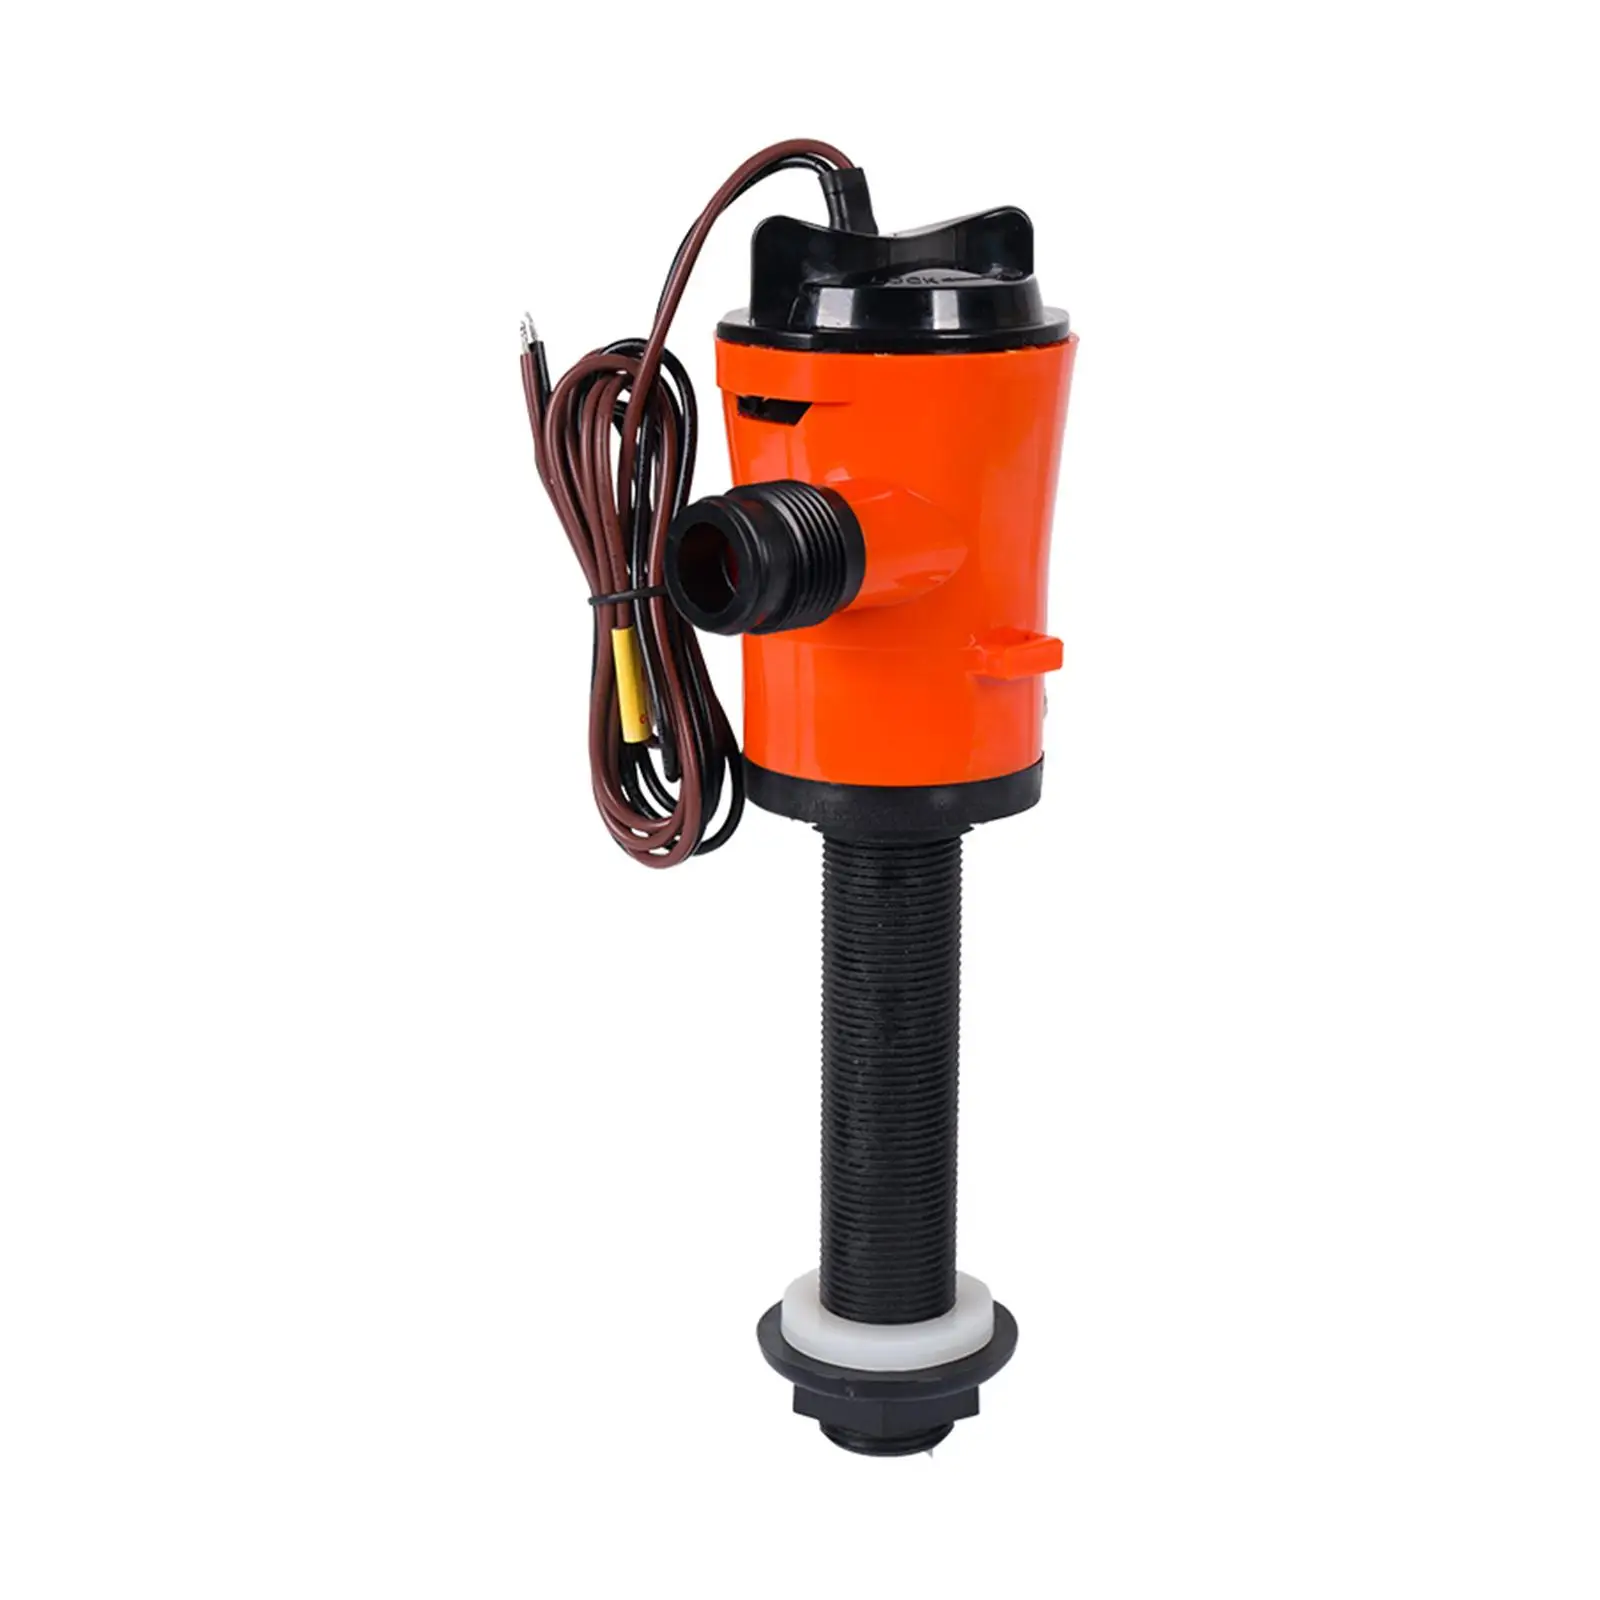 Livewell Pump Direct Replaces Accessories Professional Boat Aerator Pump